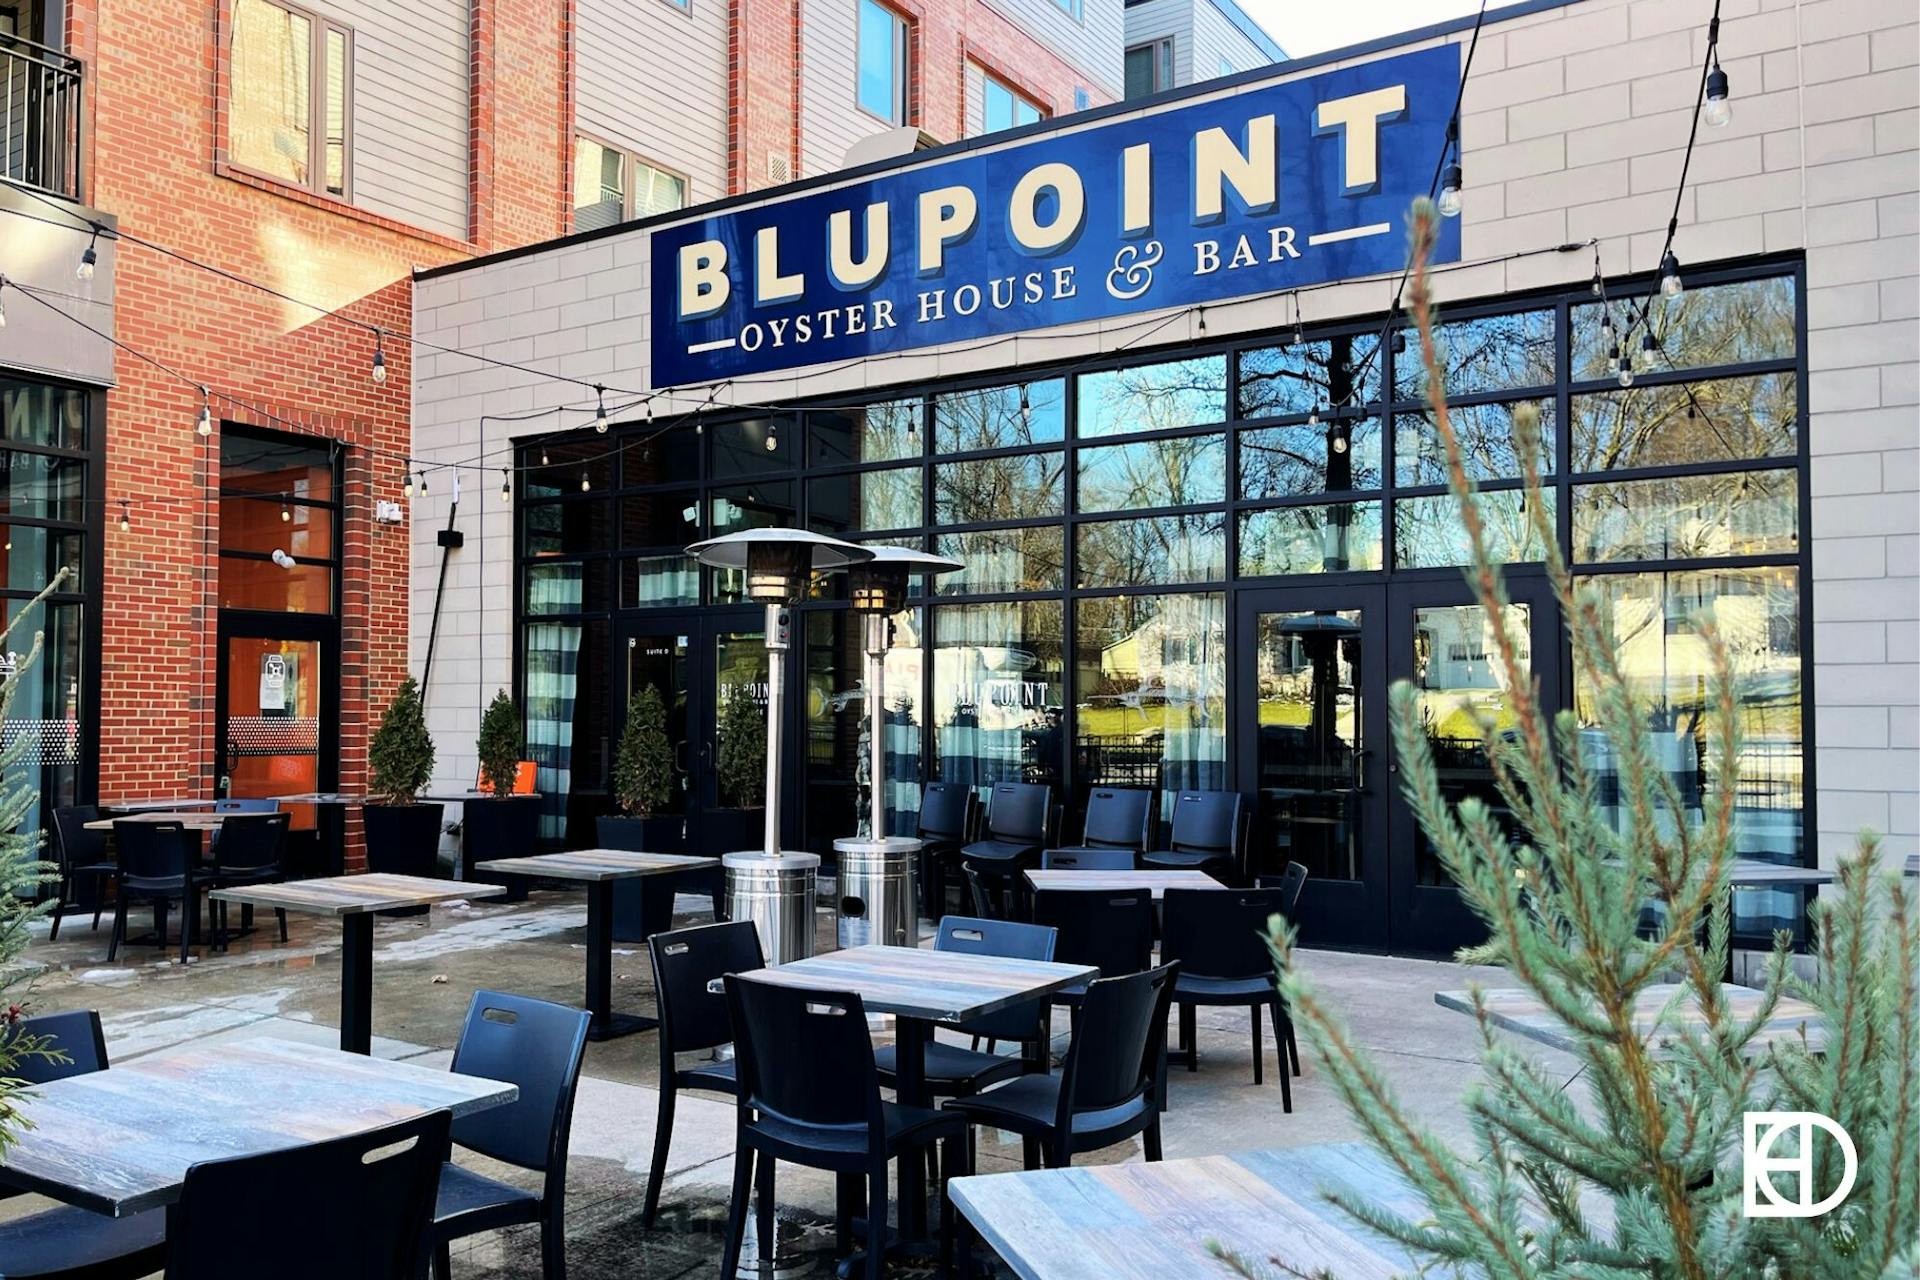 Exterior photo of Blupoint Coastal Kitchen, showing signage and patio